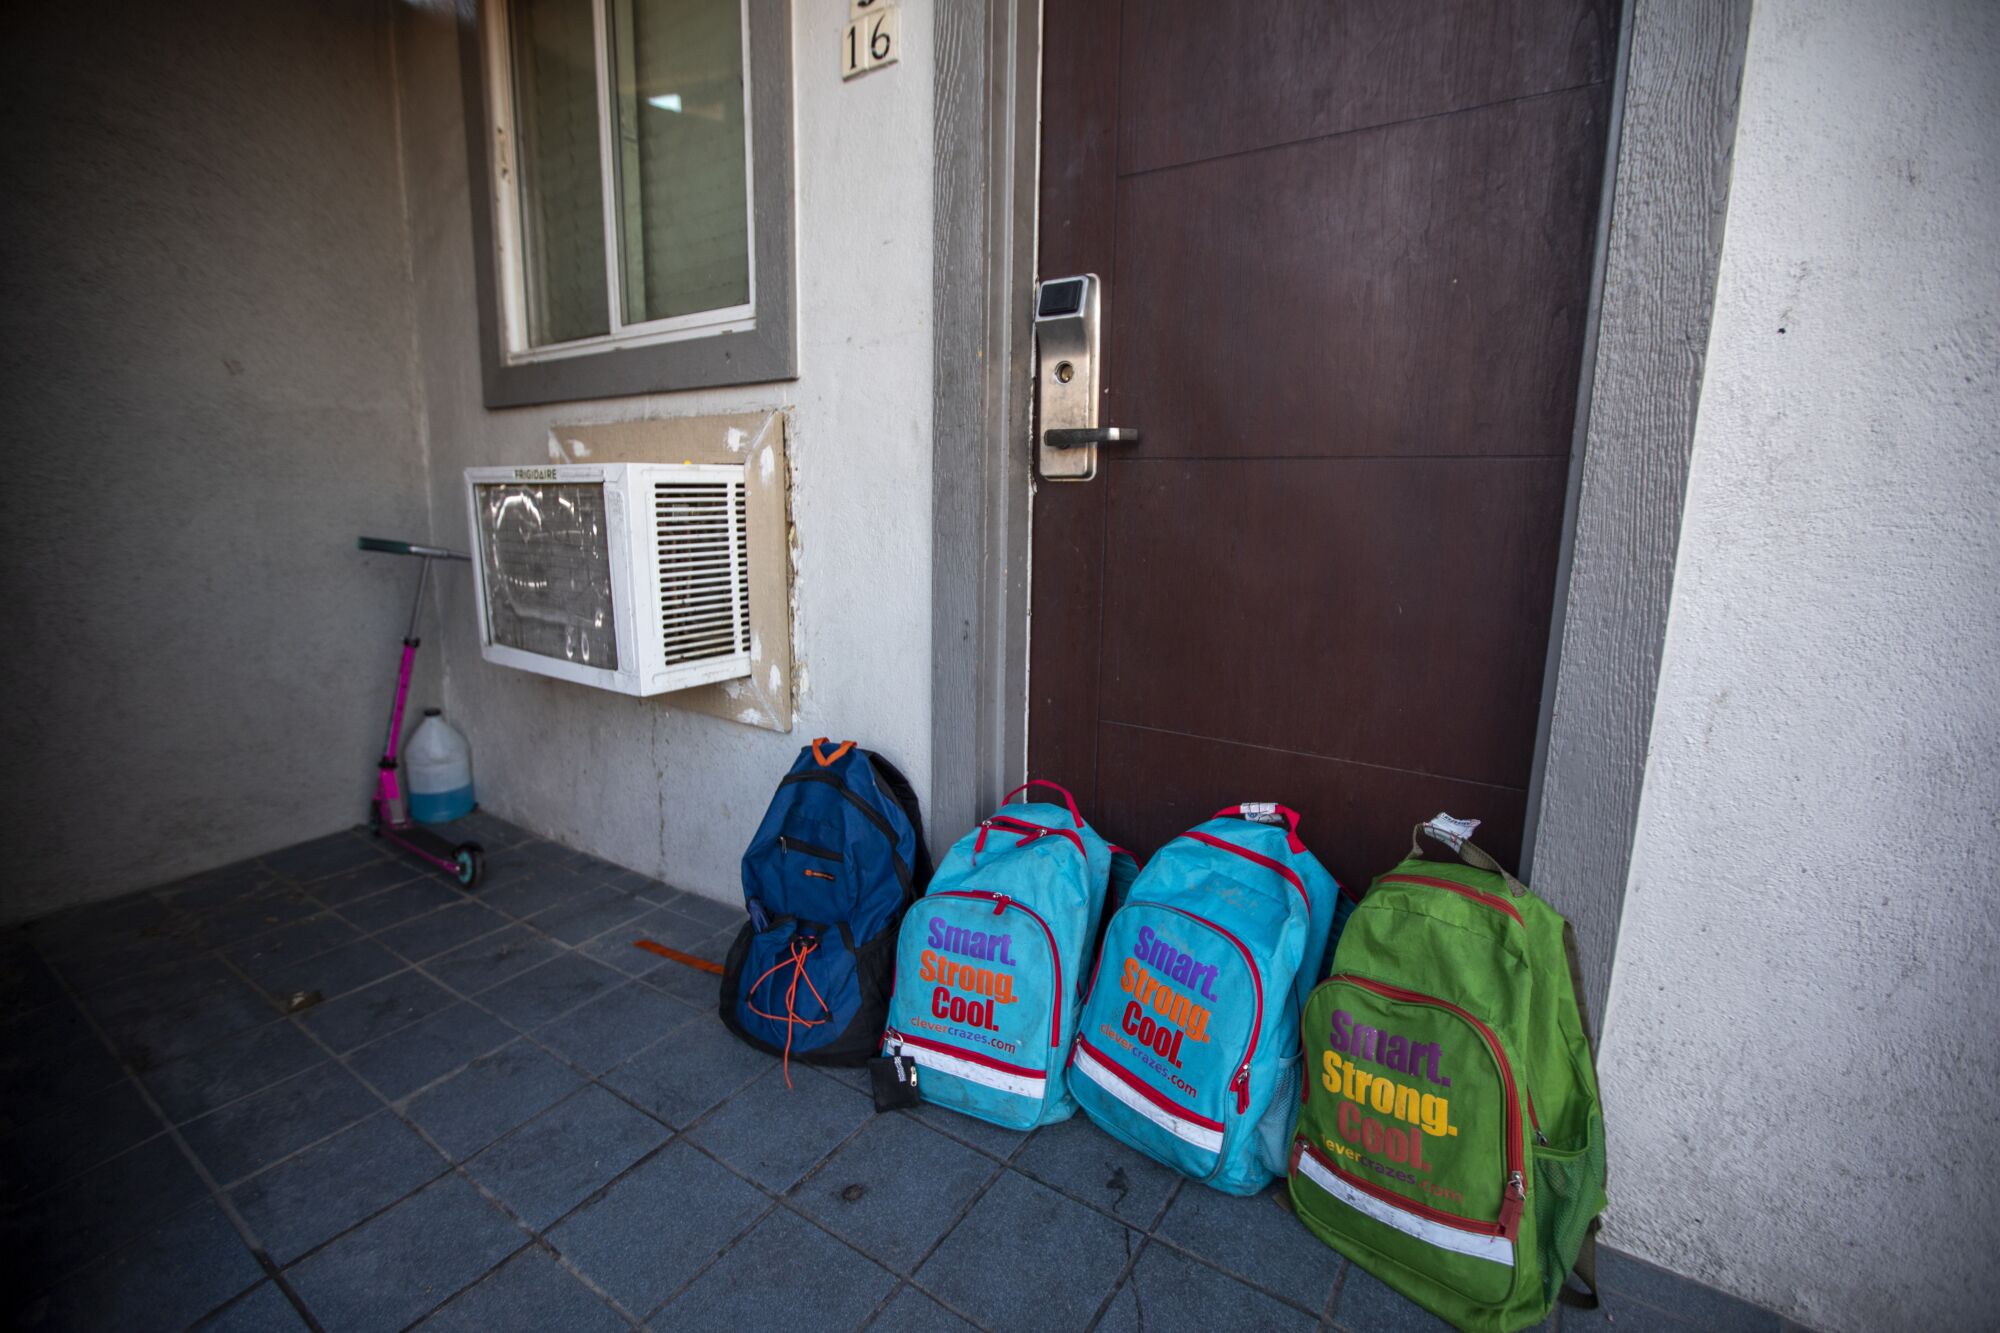 School backpacks are lined up outside a door